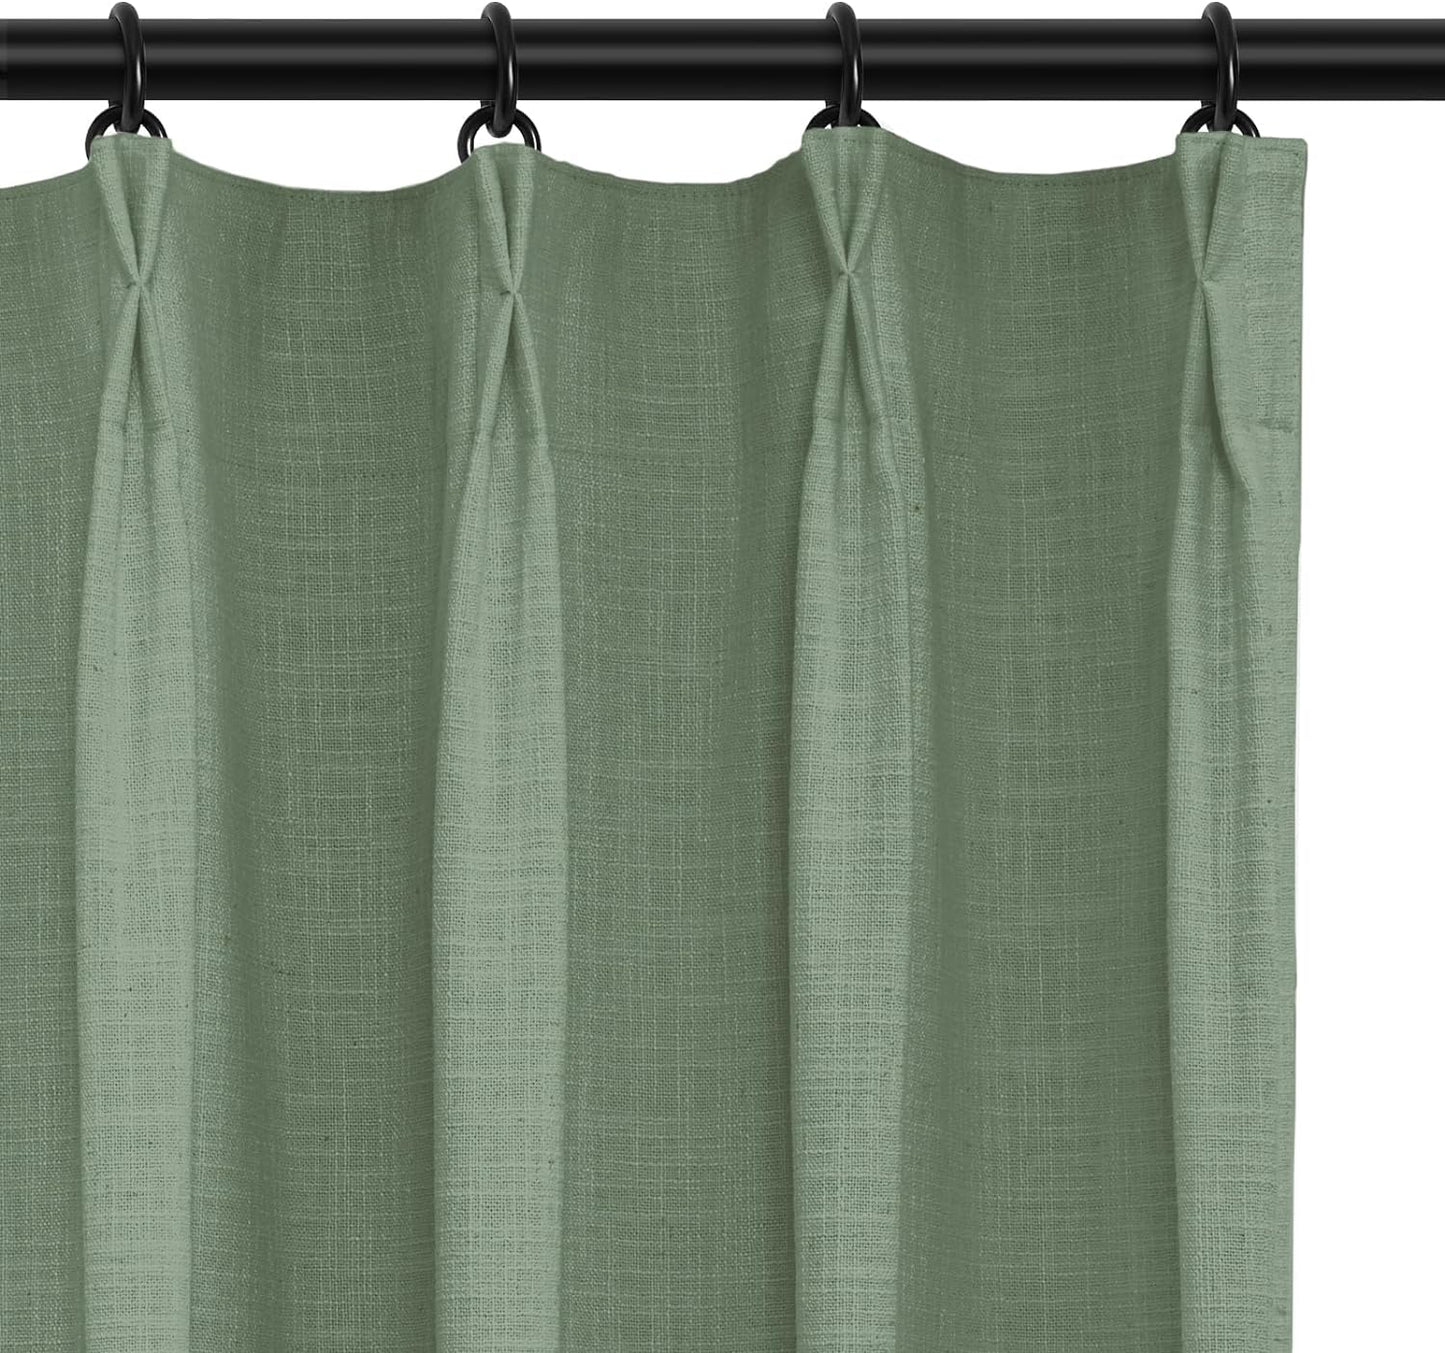 INOVADAY 100% Blackout Curtains for Bedroom, Pinch Pleated Linen Blackout Curtains 96 Inch Length 2 Panels Set, Thermal Room Darkening Linen Curtain Drapes for Living Room, W40 X L96,Beige White  INOVADAY Sage Green 40"W X 84"L-2 Panels 